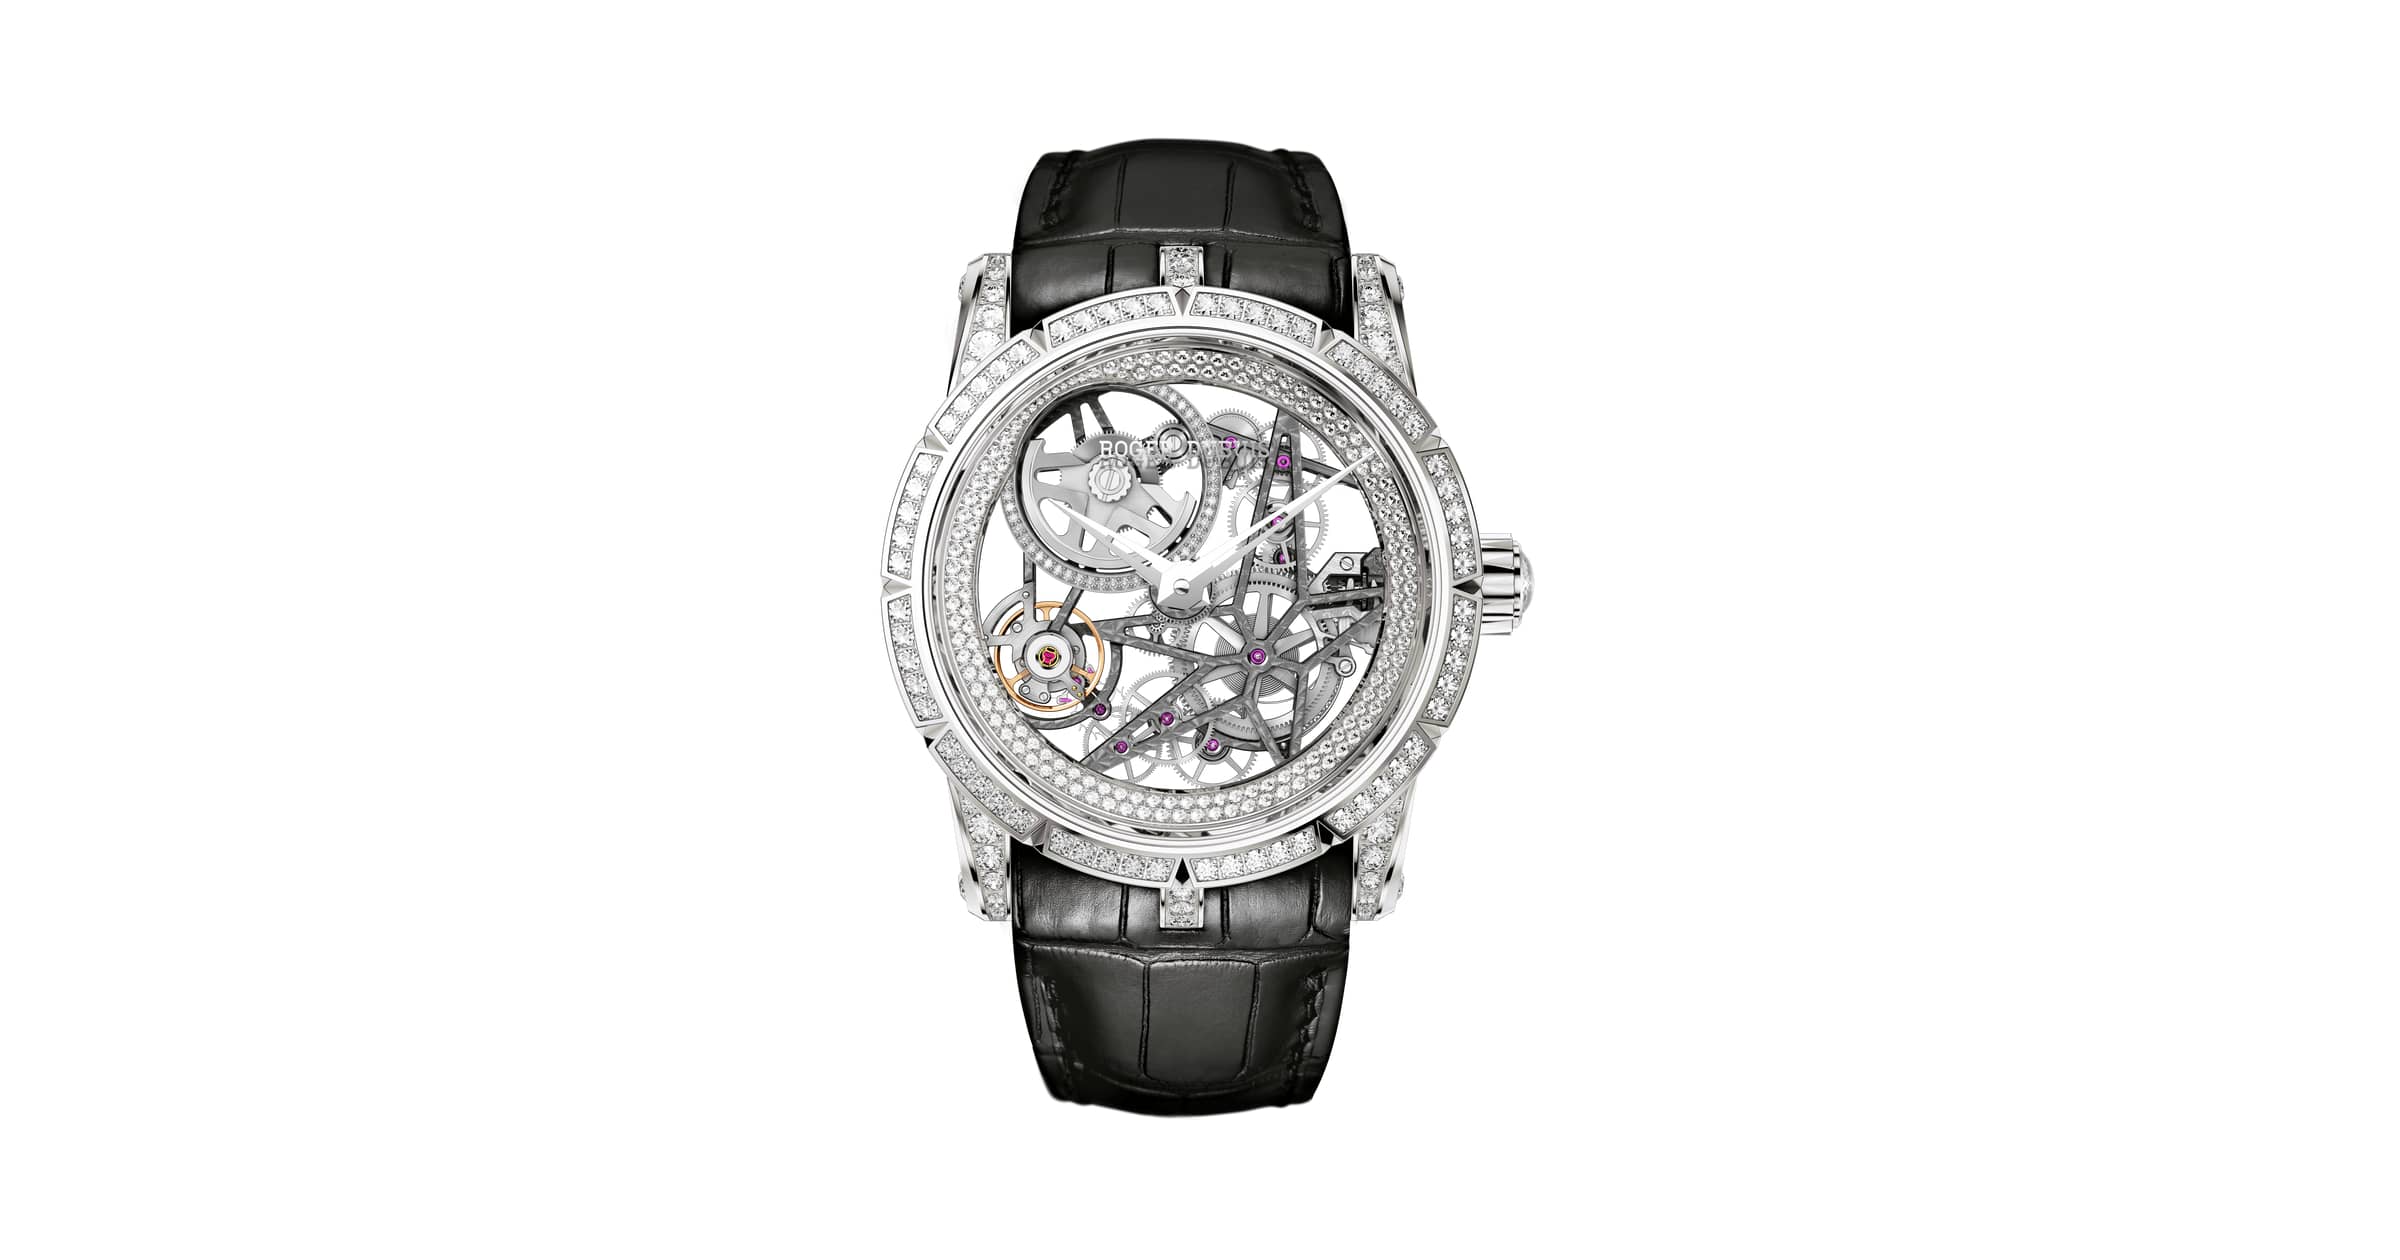 Excalibur White Gold 42mm - Roger Dubuis